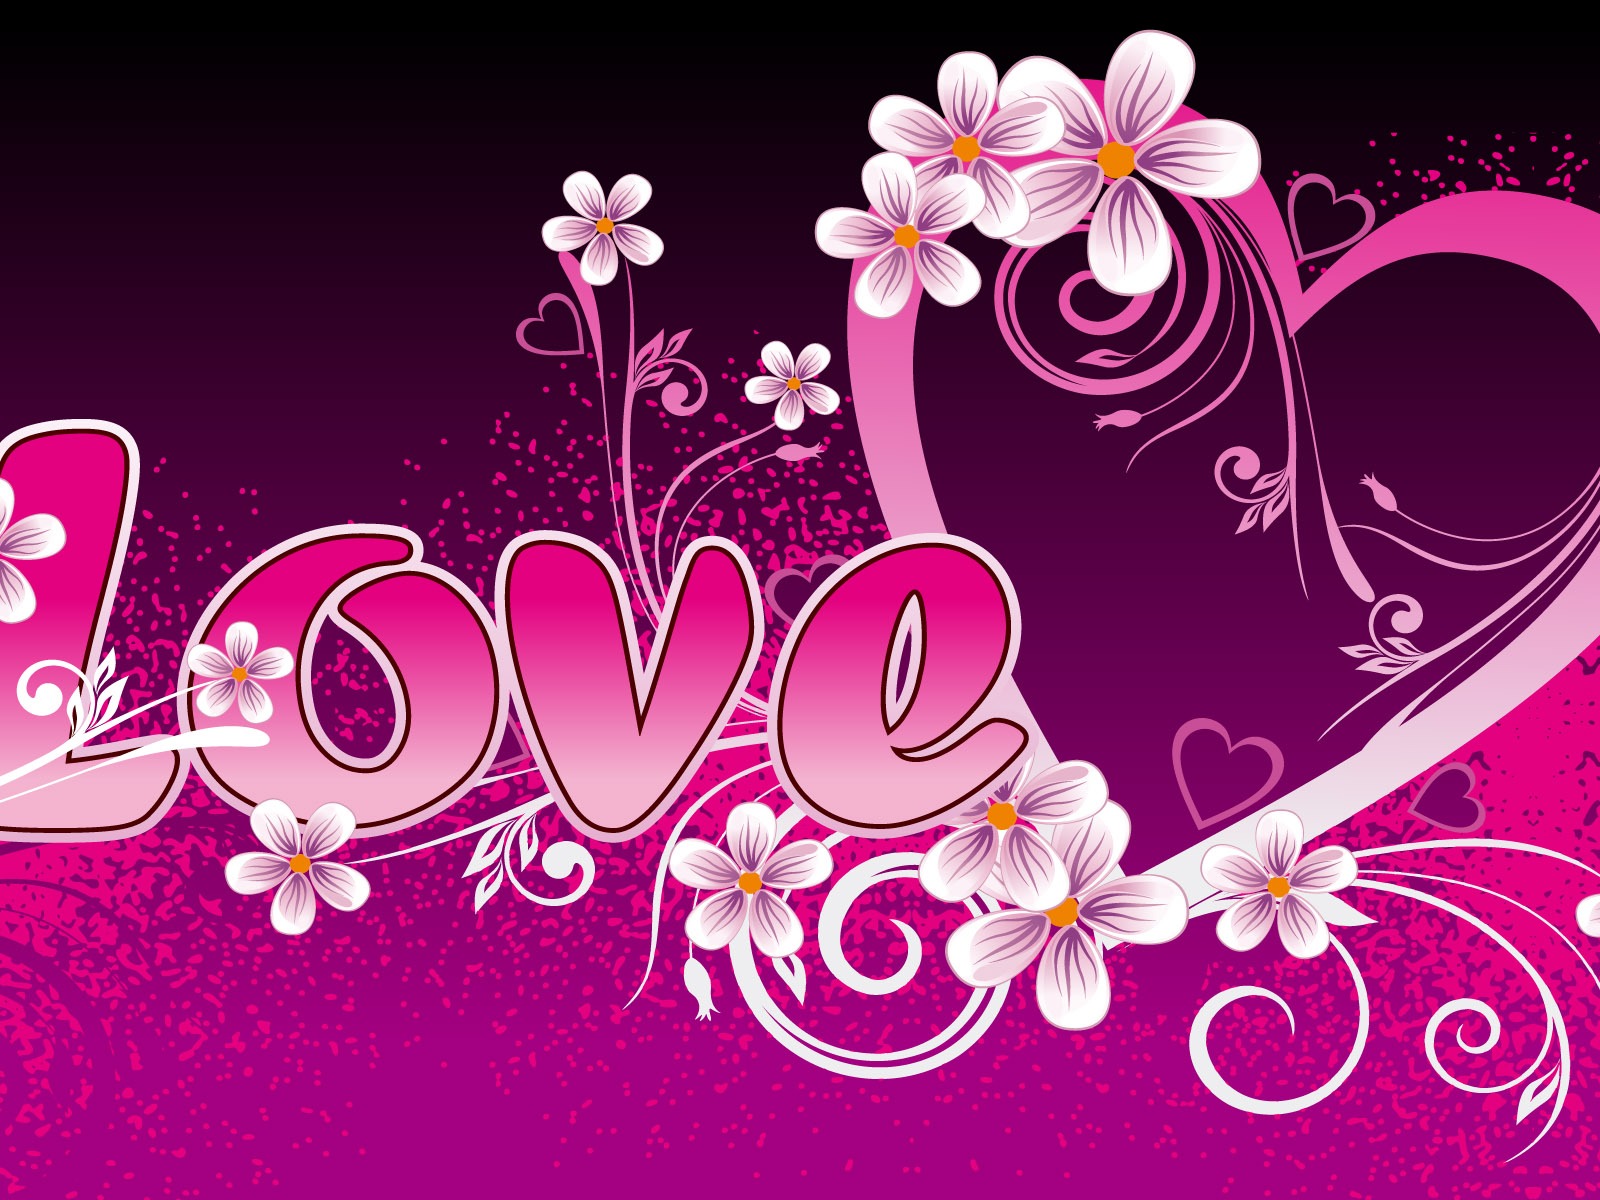 Valentine's Day Love Theme Wallpapers #1 - 1600x1200